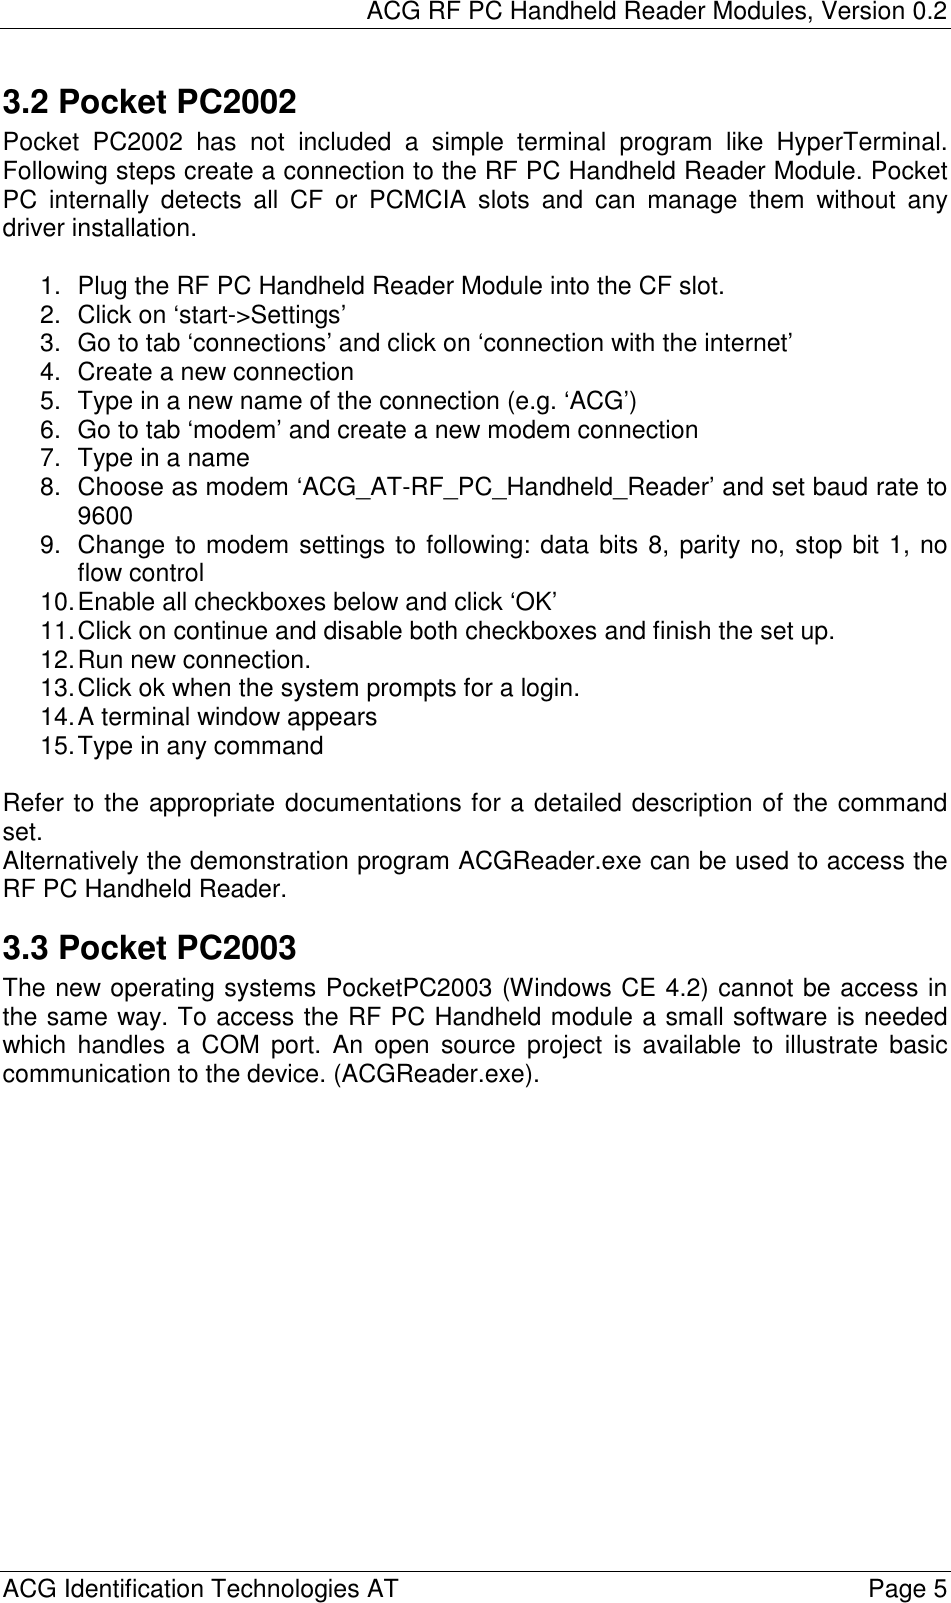 ACG RF PC Handheld Reader Modules, Version 0.2  ACG Identification Technologies AT    Page 5 3.2 Pocket PC2002 Pocket PC2002 has not included a simple terminal program like HyperTerminal. Following steps create a connection to the RF PC Handheld Reader Module. Pocket PC internally detects all CF or PCMCIA slots and can manage them without any driver installation.  1.  Plug the RF PC Handheld Reader Module into the CF slot. 2.  Click on ‘start-&gt;Settings’ 3.  Go to tab ‘connections’ and click on ‘connection with the internet’ 4.  Create a new connection 5.  Type in a new name of the connection (e.g. ‘ACG’) 6.  Go to tab ‘modem’ and create a new modem connection 7.  Type in a name 8.  Choose as modem ‘ACG_AT-RF_PC_Handheld_Reader’ and set baud rate to 9600 9.  Change to modem settings to following: data bits 8, parity no, stop bit 1, no flow control 10. Enable all checkboxes below and click ‘OK’ 11. Click on continue and disable both checkboxes and finish the set up. 12. Run new connection. 13. Click ok when the system prompts for a login. 14. A terminal window appears 15. Type in any command  Refer to the appropriate documentations for a detailed description of the command set. Alternatively the demonstration program ACGReader.exe can be used to access the RF PC Handheld Reader. 3.3 Pocket PC2003 The new operating systems PocketPC2003 (Windows CE 4.2) cannot be access in the same way. To access the RF PC Handheld module a small software is needed which handles a COM port. An open source project is available to illustrate basic communication to the device. (ACGReader.exe).  